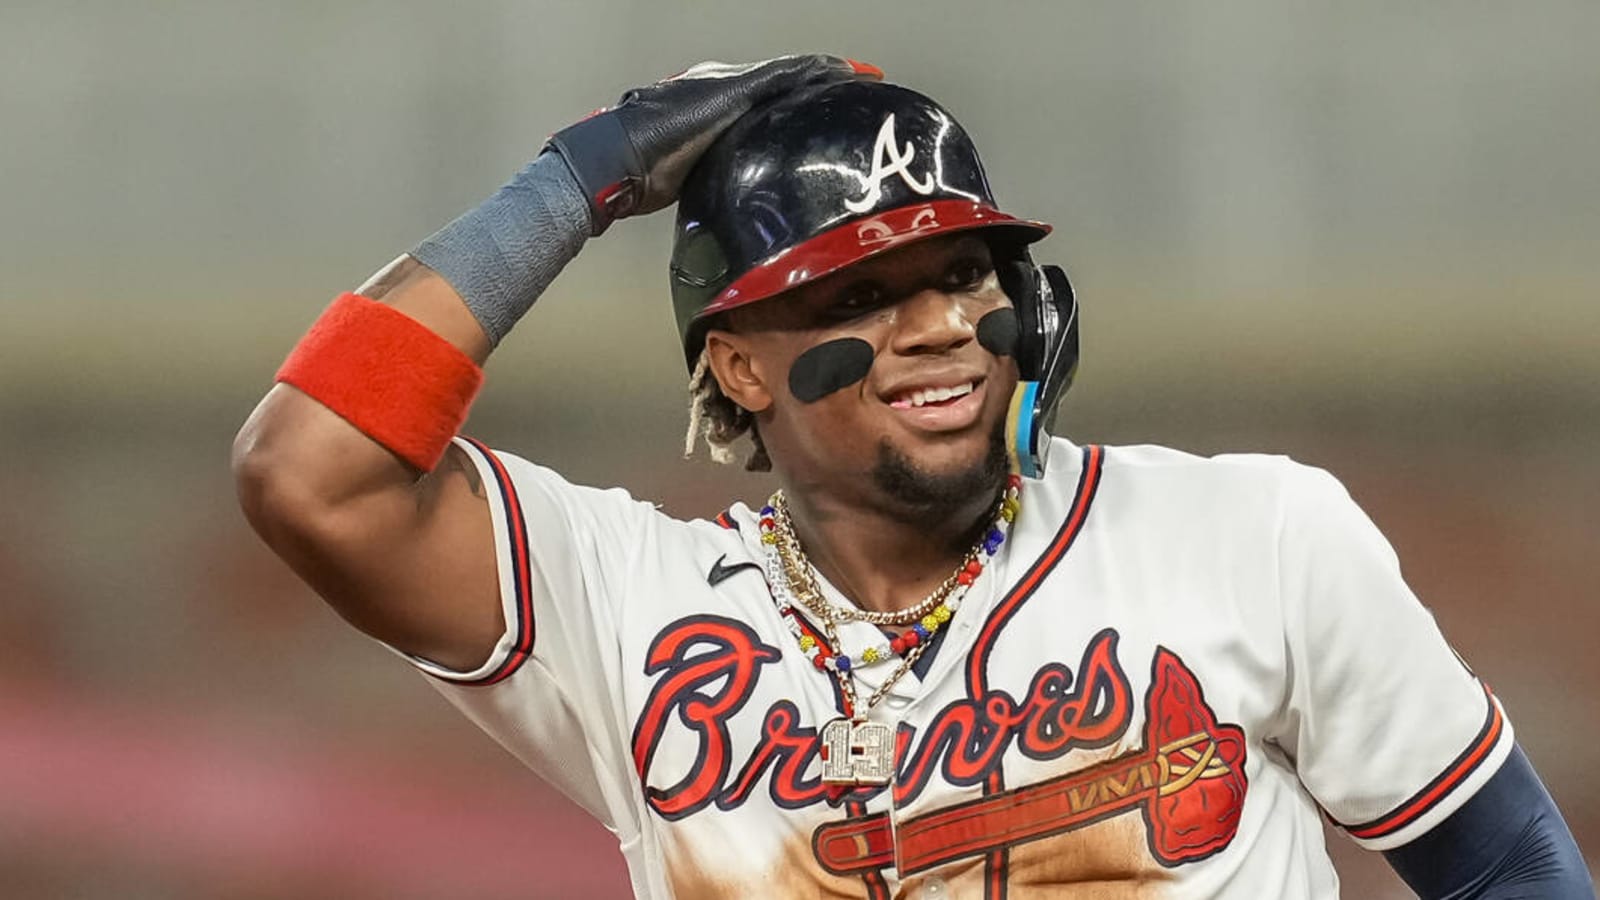 Have You Seen This? Ronald Acuna Jr. becomes first member of 40-70